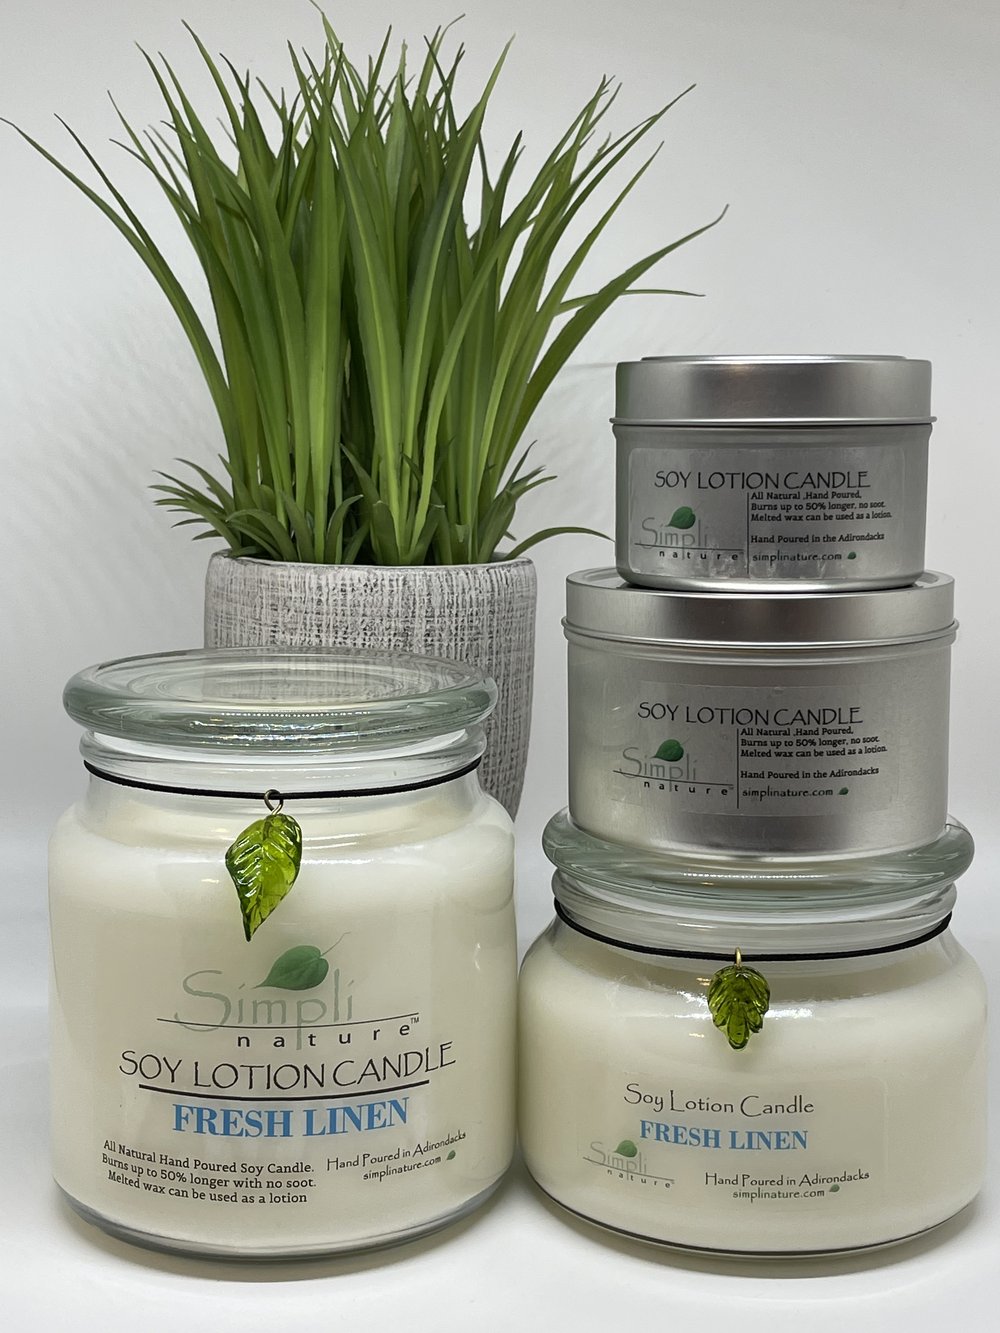 Fresh Linen-Soy Lotion Candle — Simpli Nature All Natural Soy Lotion Candles Hand Poured in the Adirondack New